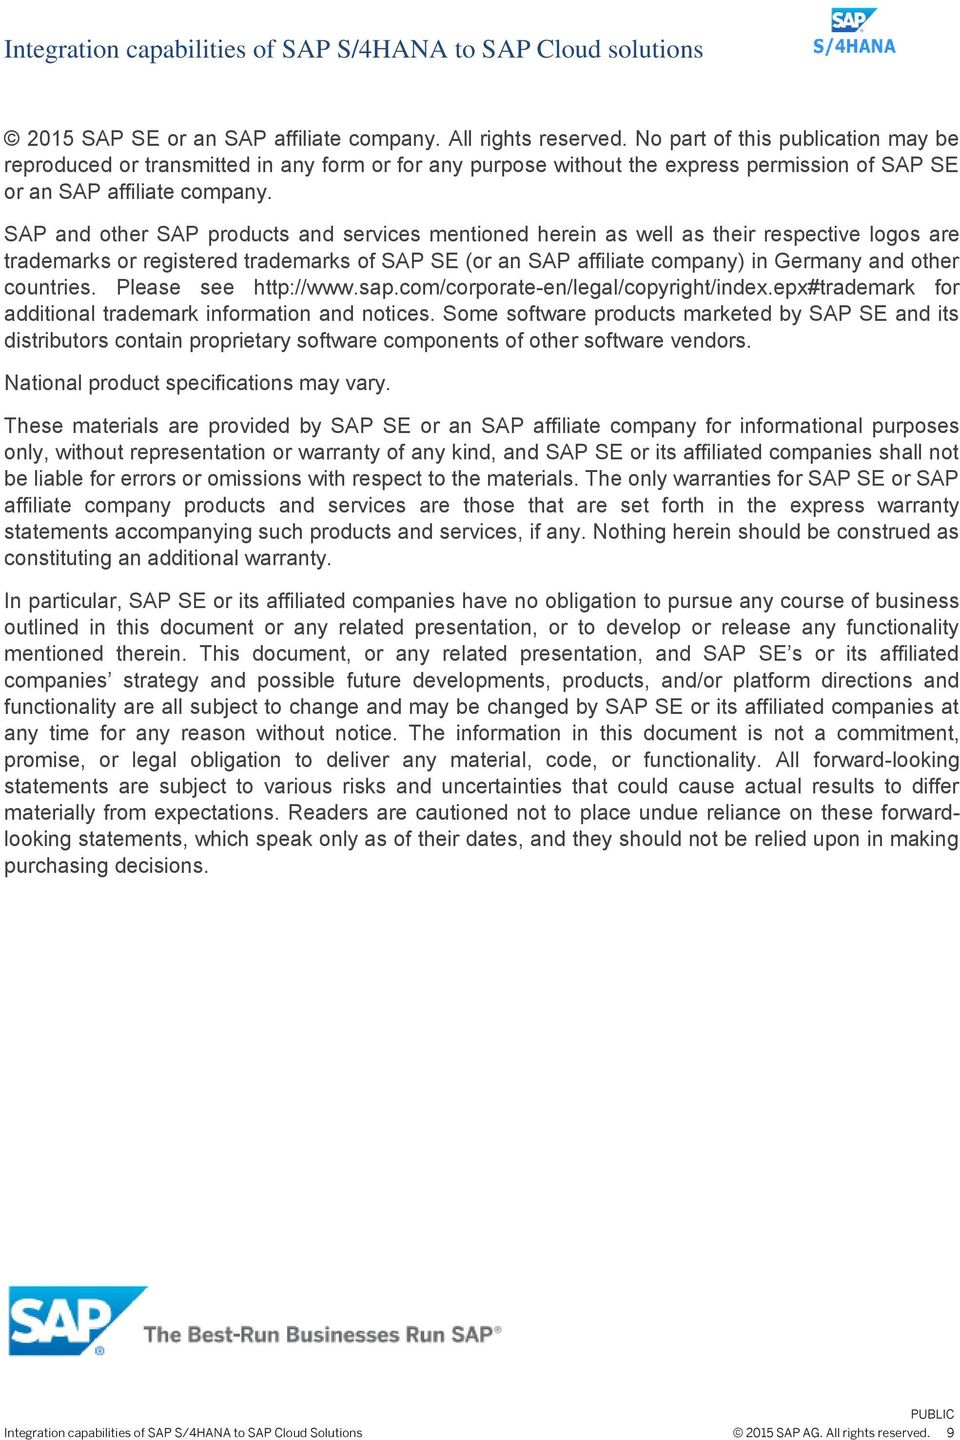 SAP and other SAP products and services mentioned herein as well as their respective logos are trademarks or registered trademarks of SAP SE (or an SAP affiliate company) in Germany and other